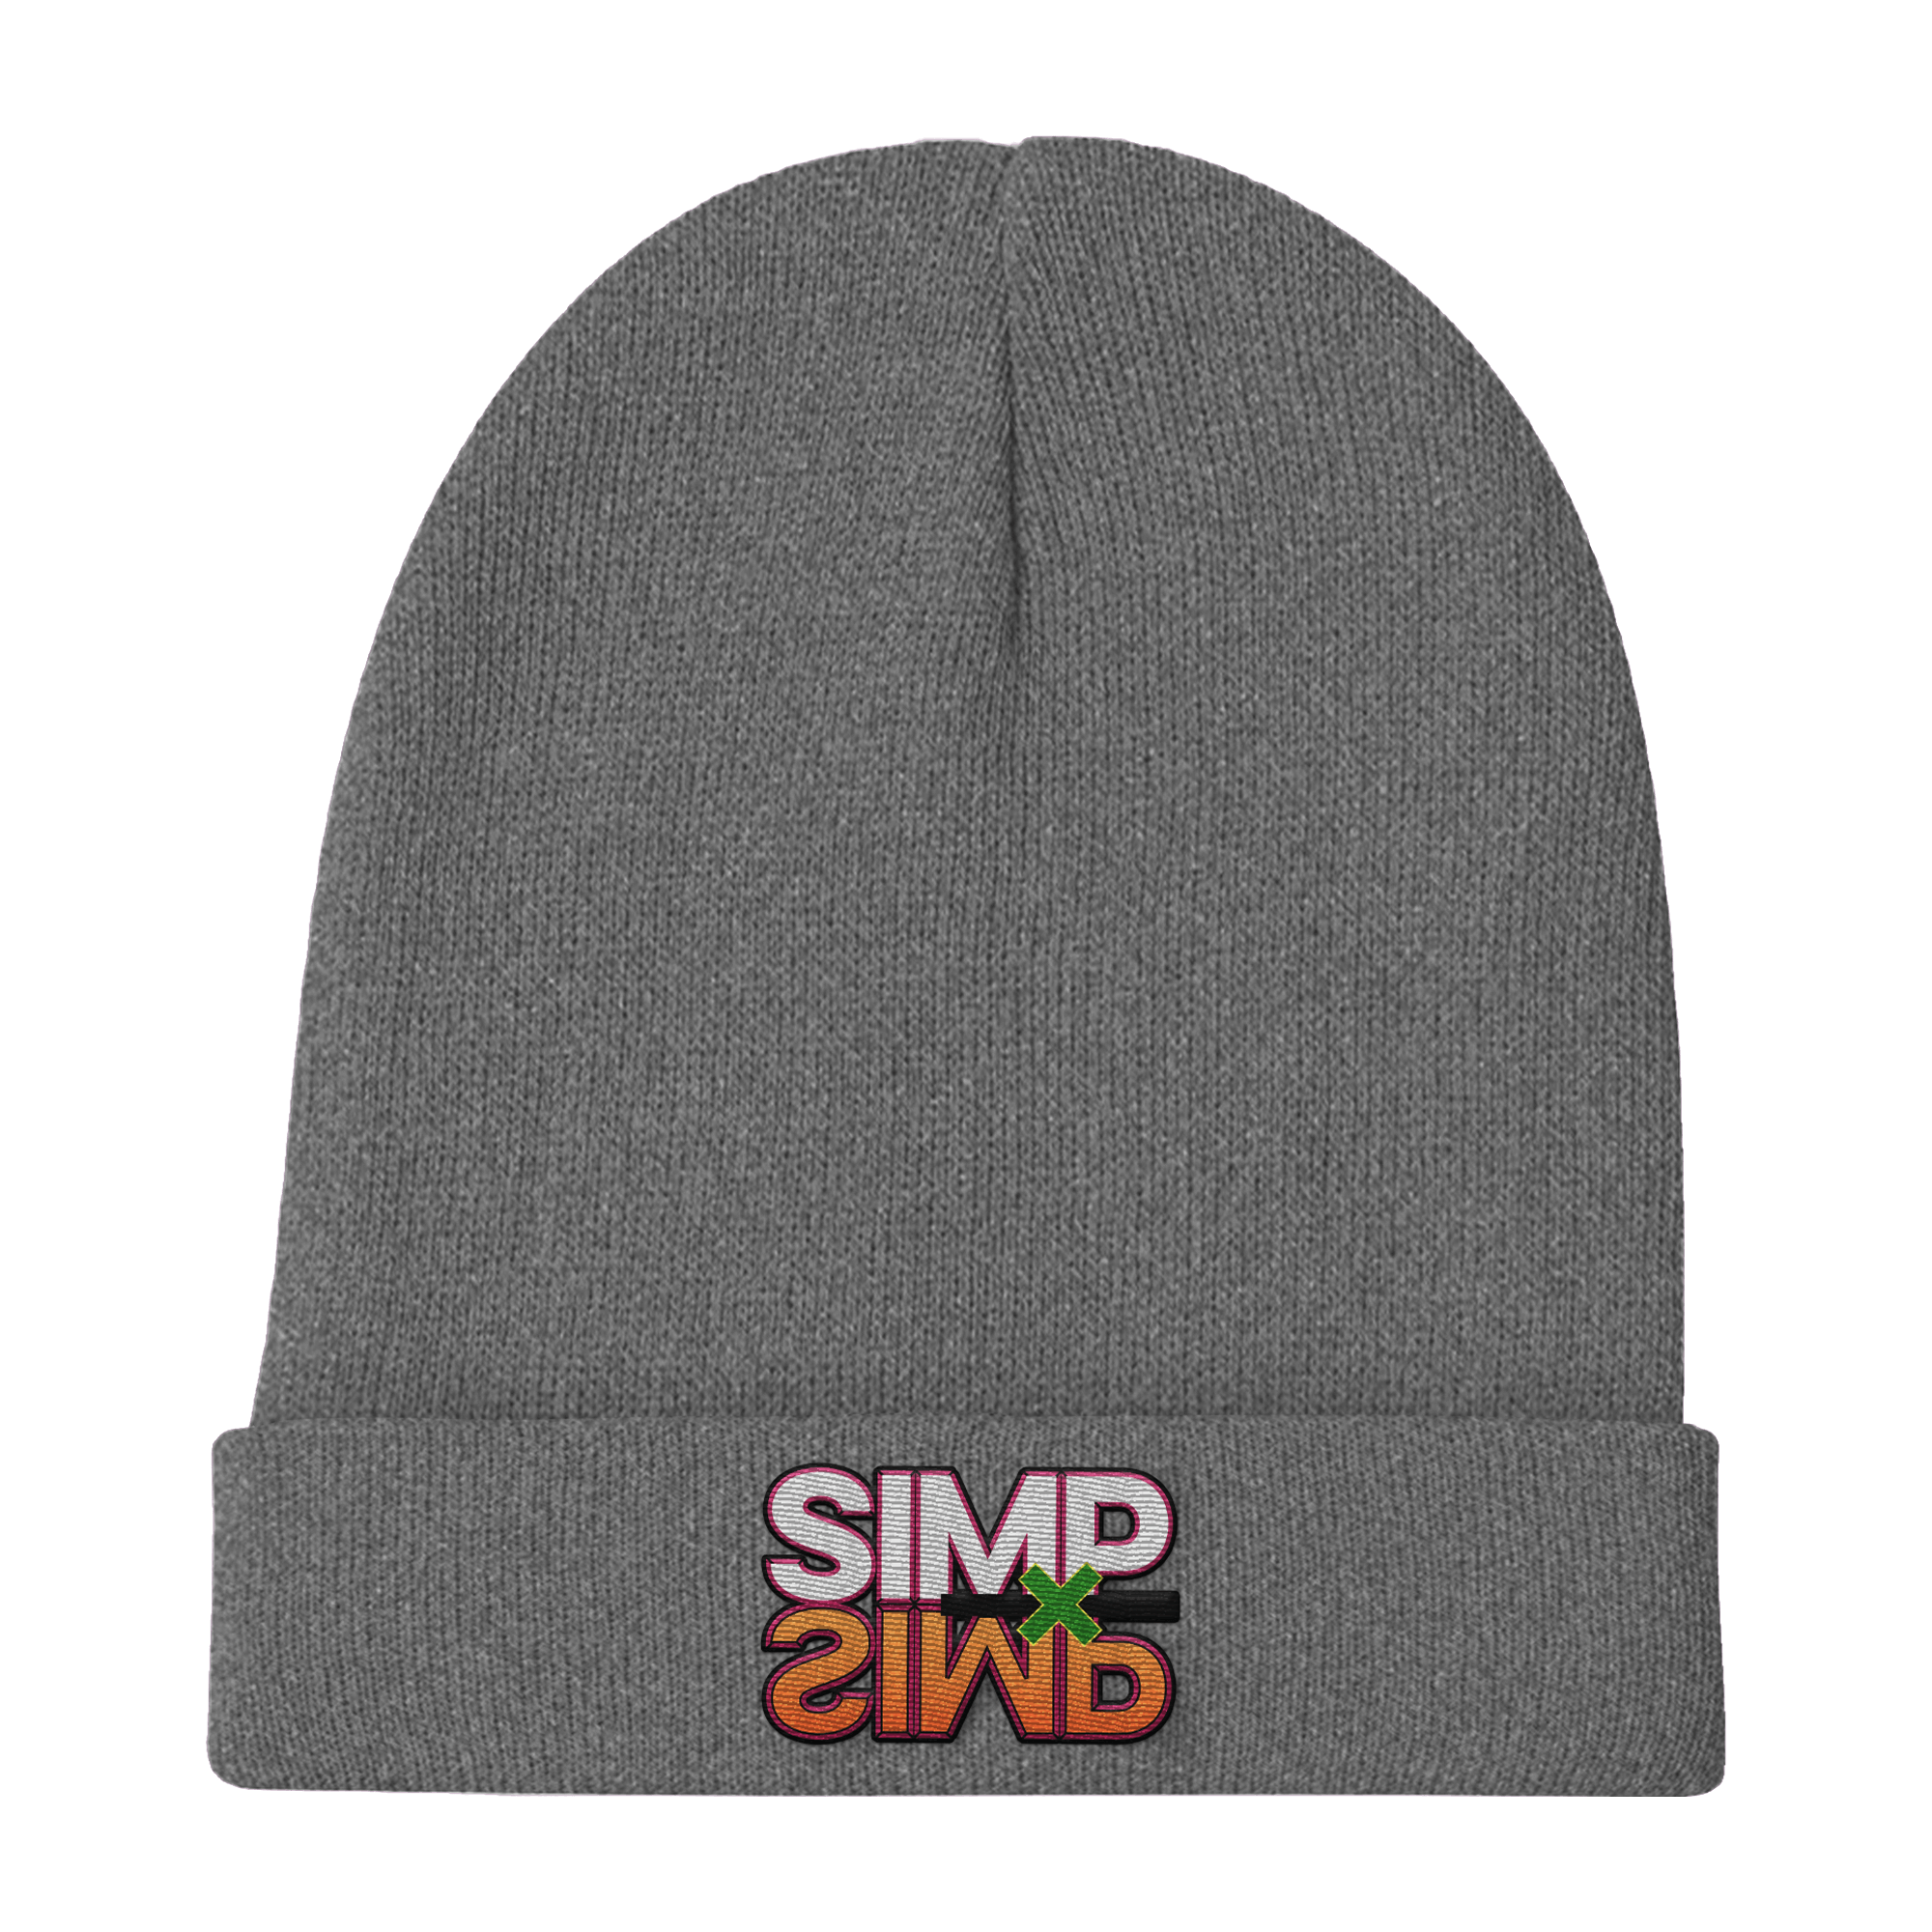 The Simp x Simp beanie is made from grey 100% Soft-Touch Acrylic ( 55% Polyester/45% Acrylic). It has embroidered Simp x Simp logo inspired by the Hunter Hunter logo. Pretty Nerdy.